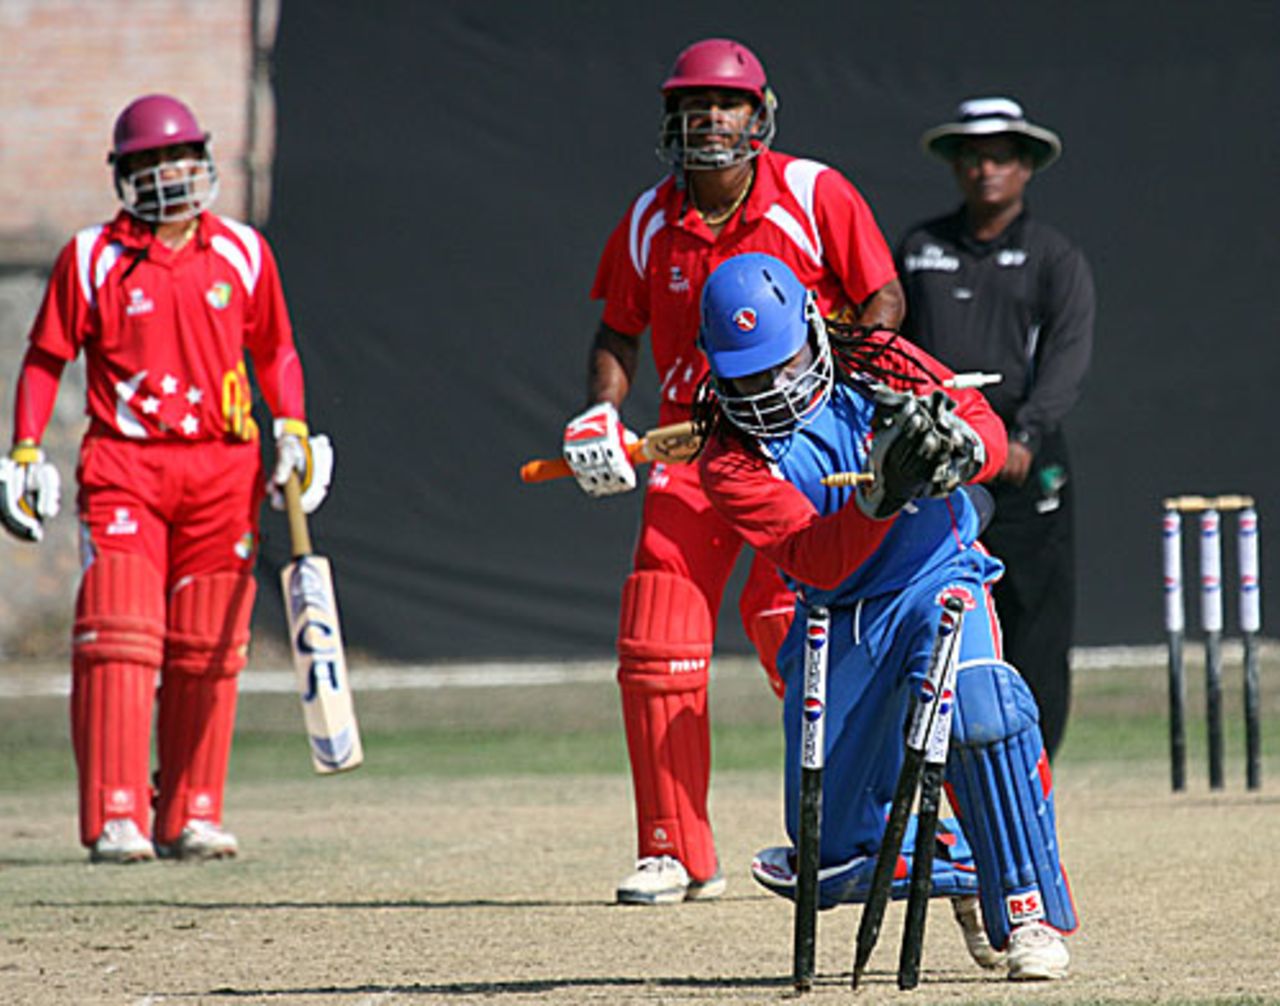 Buddika Mendis is run out by a fair distance, Singapore v USA, ICC World Cricket League Division Five, Lalitpur, February 24, 2010